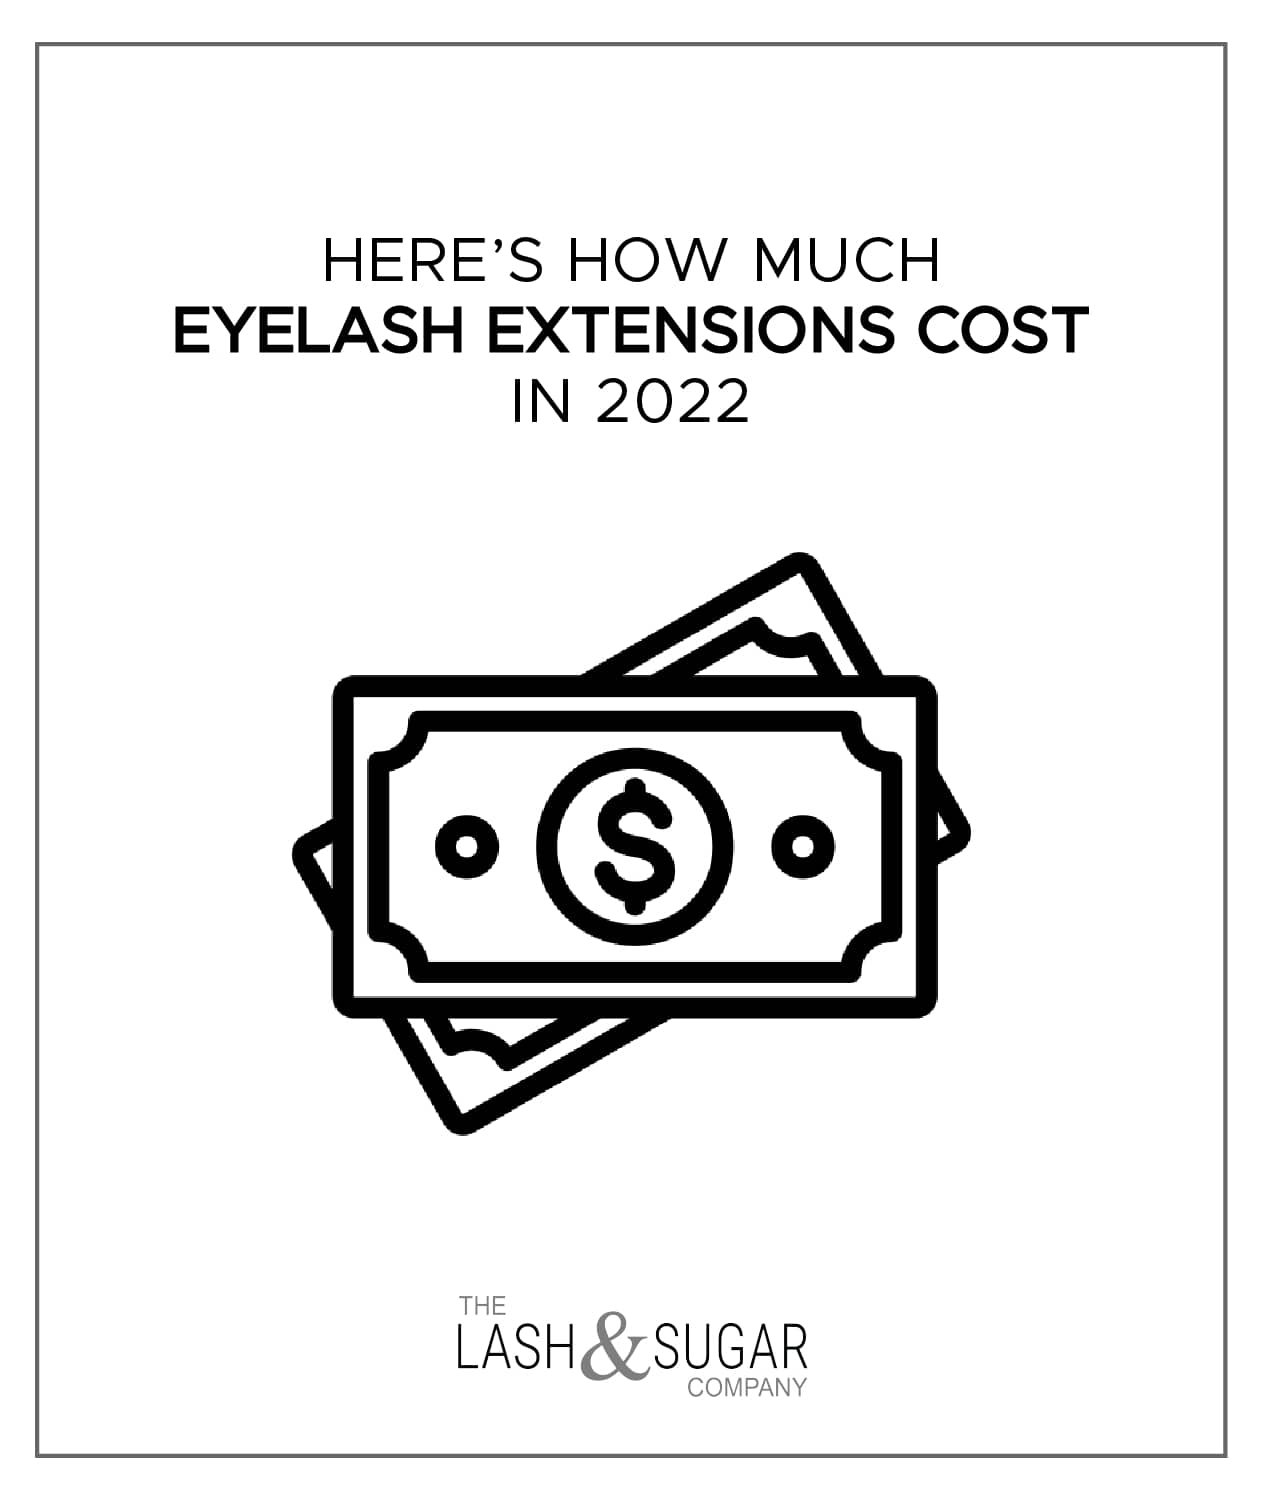 Here's How Much Eyelash Extensions Cost in 2022